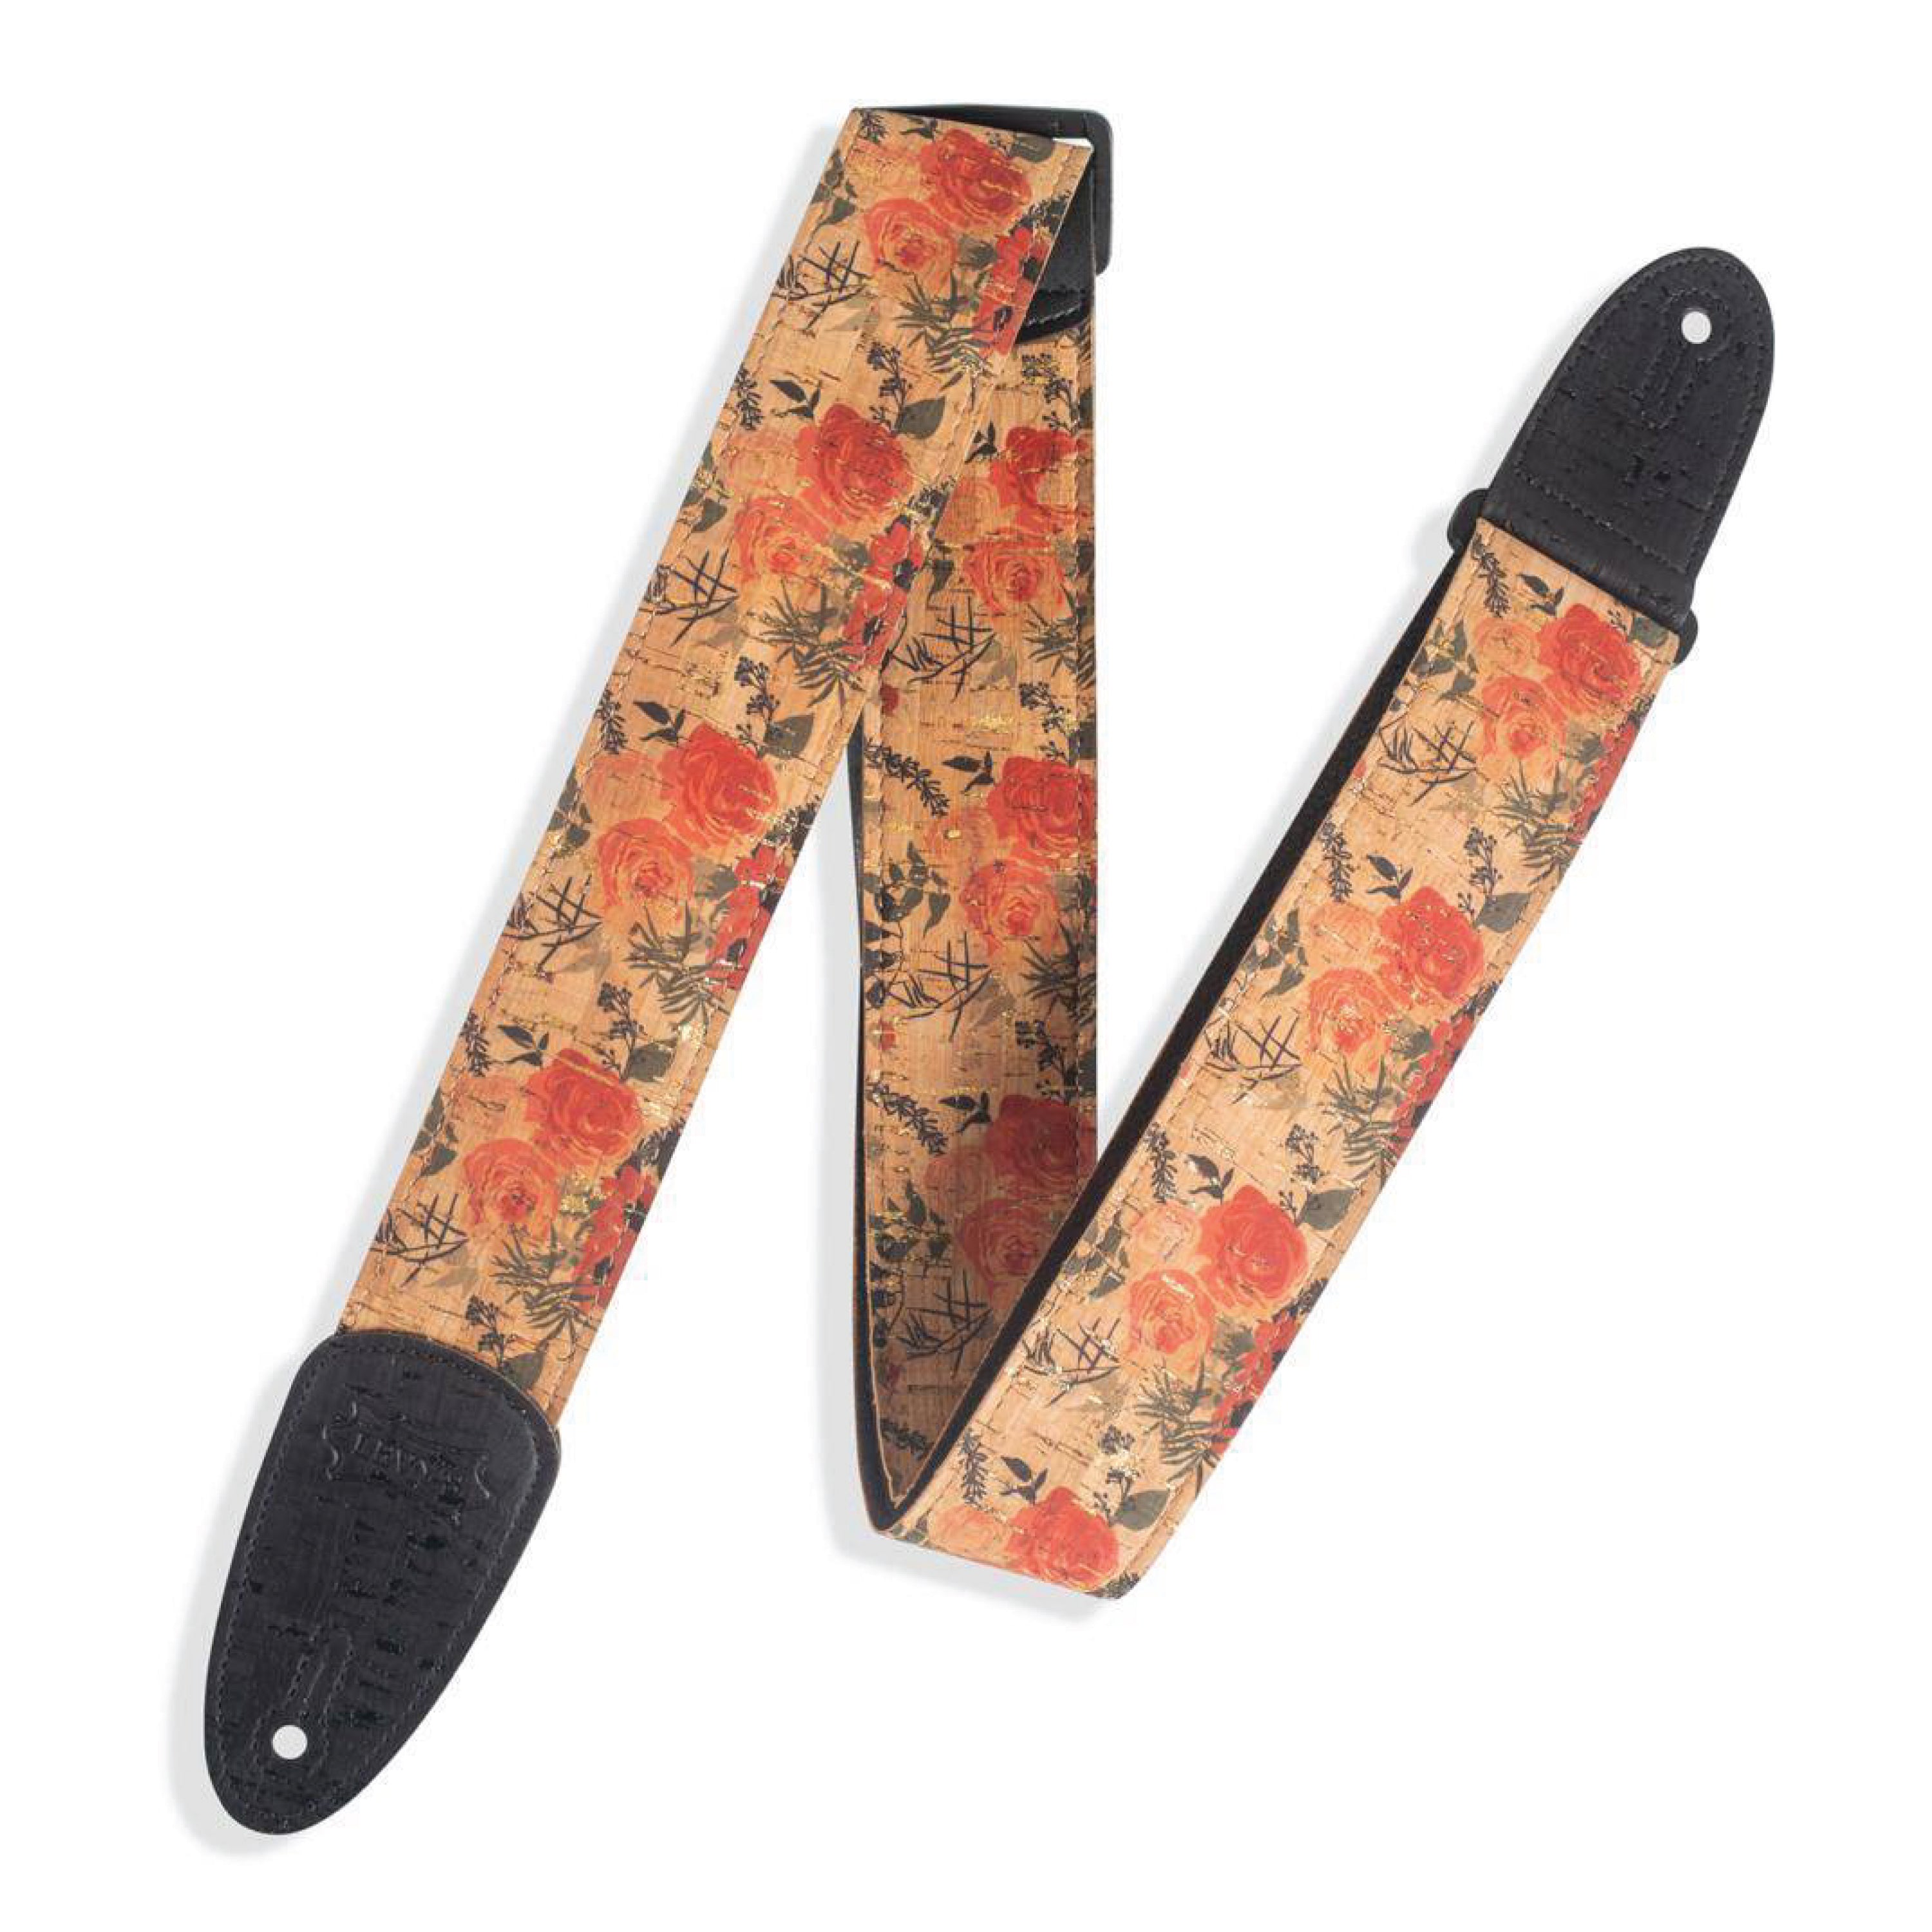 Levy's MX8-001 Specialty Series Guitar Strap, Wildflower Cork Red, Cream Black, Natural